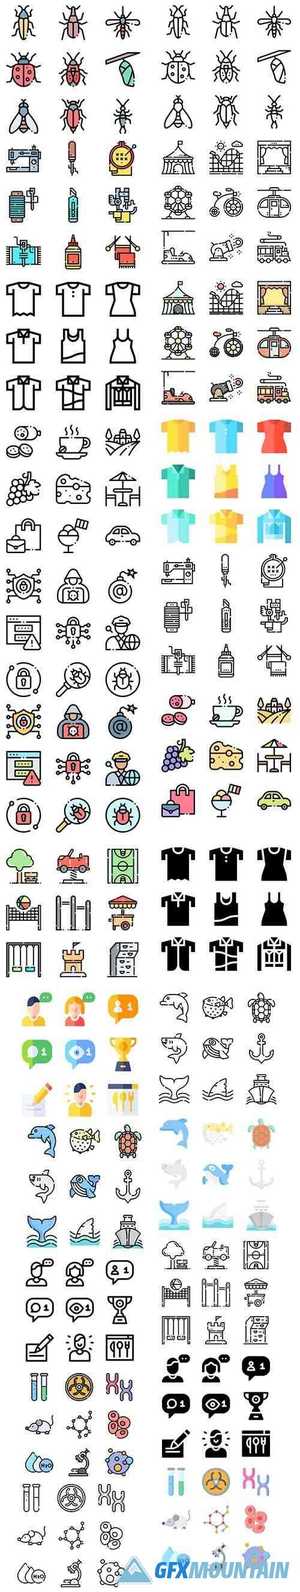 Vector Icons - More 1000+ Icons in 1 Pack!